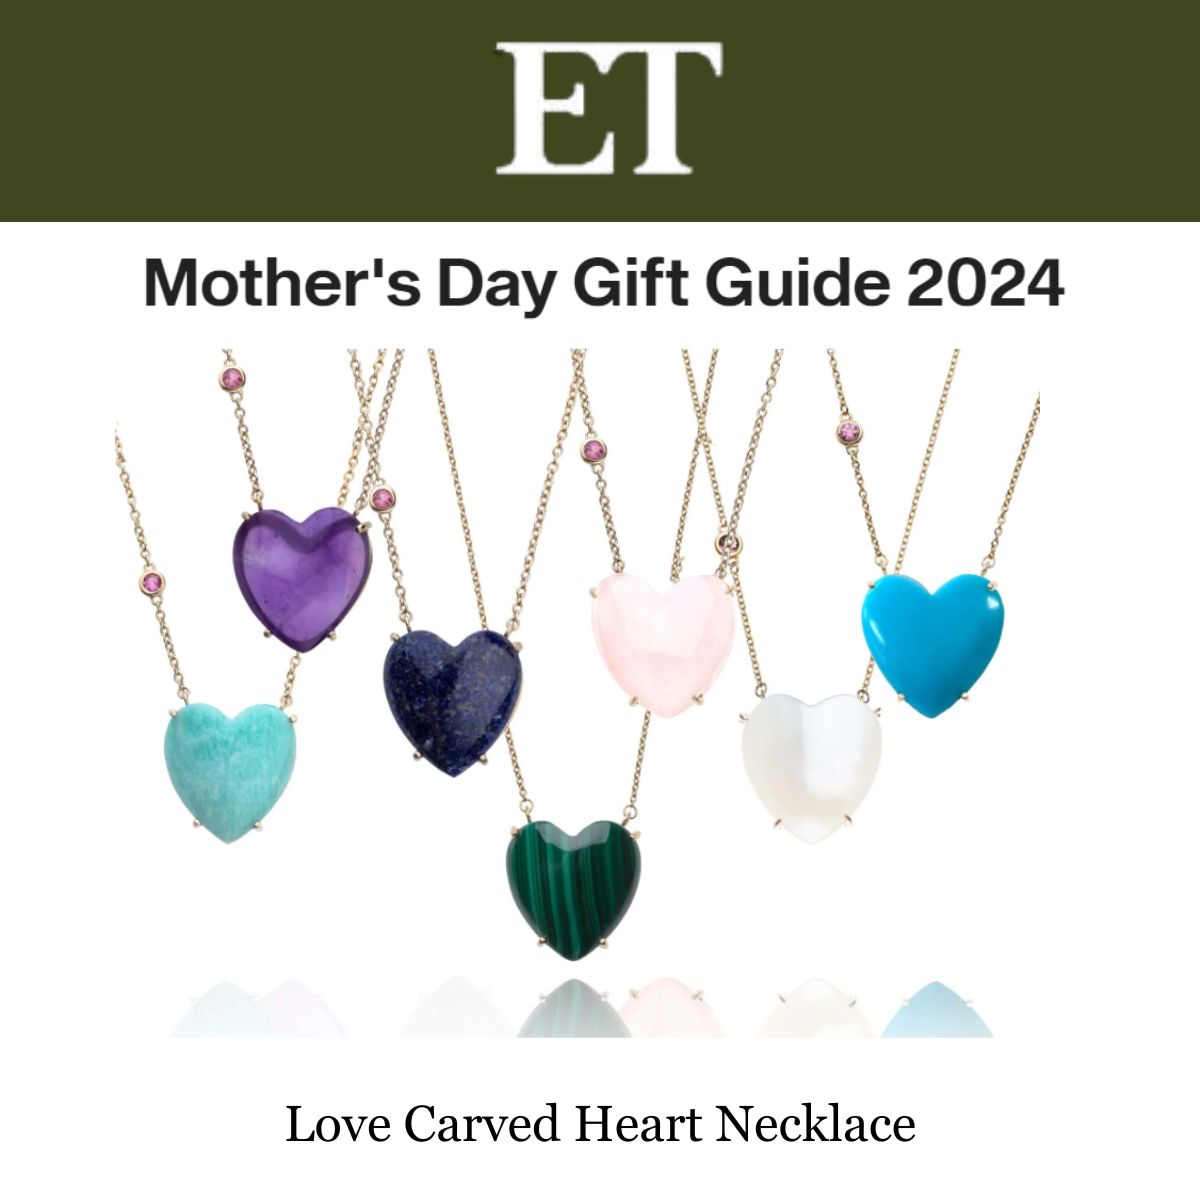 Press Highlight: ET's Mother's Day Gift Guide 2024